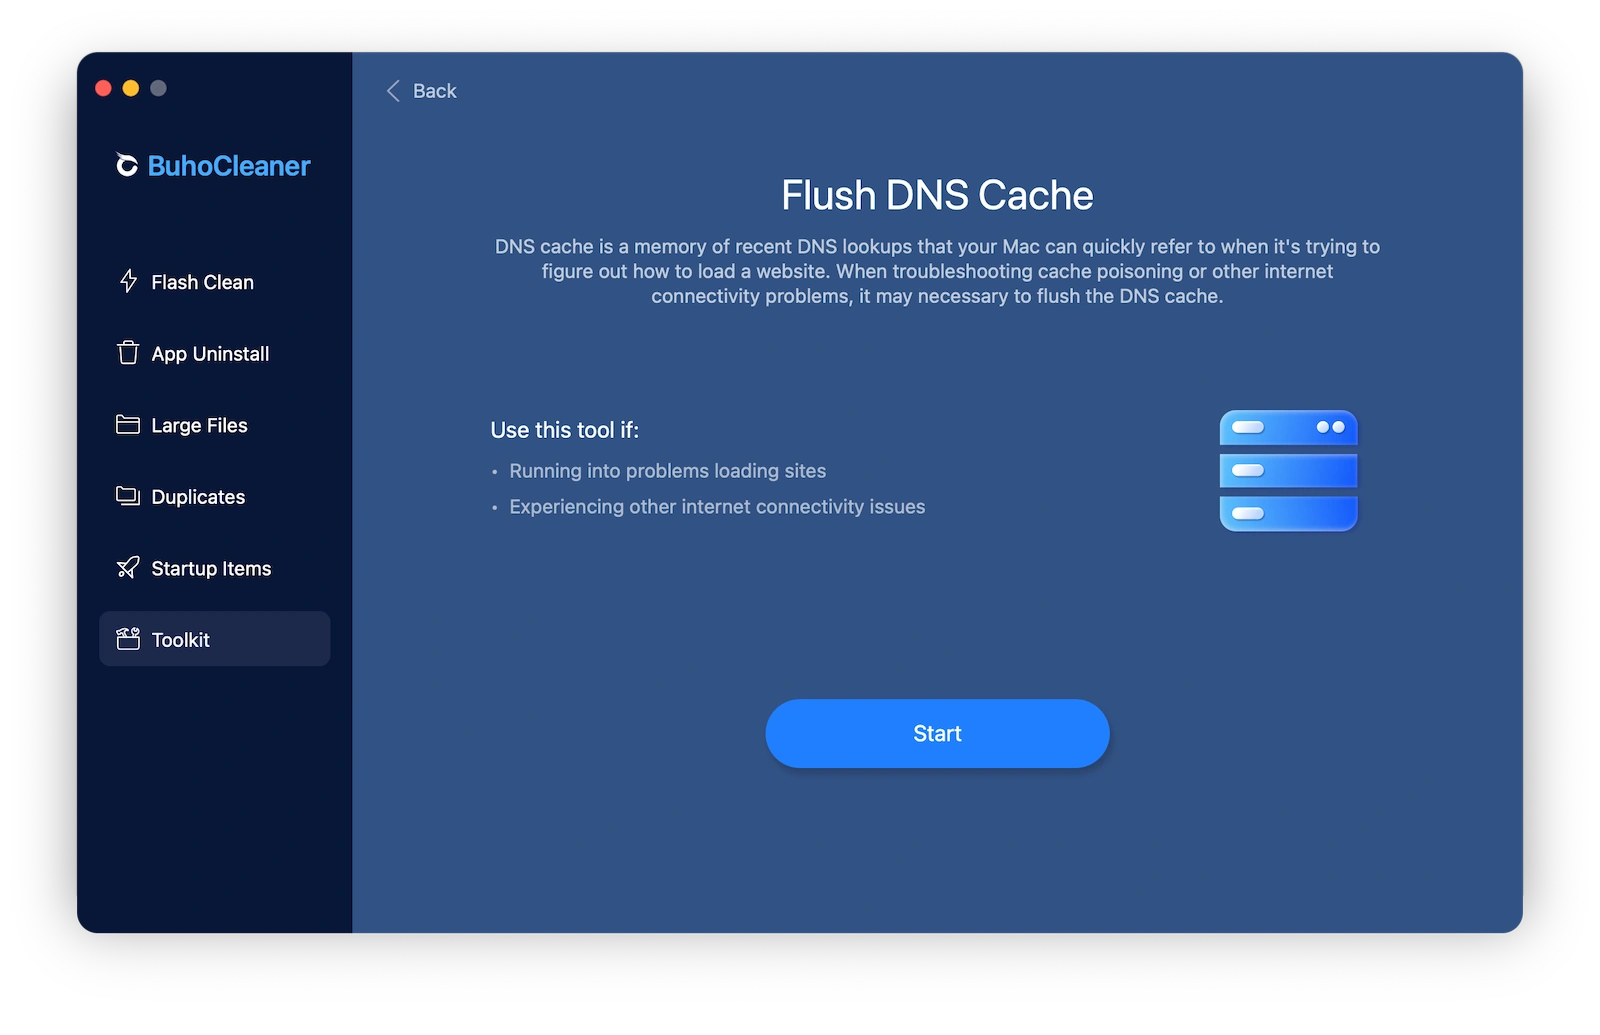 Flush DNS Cache with BuhoCleaner